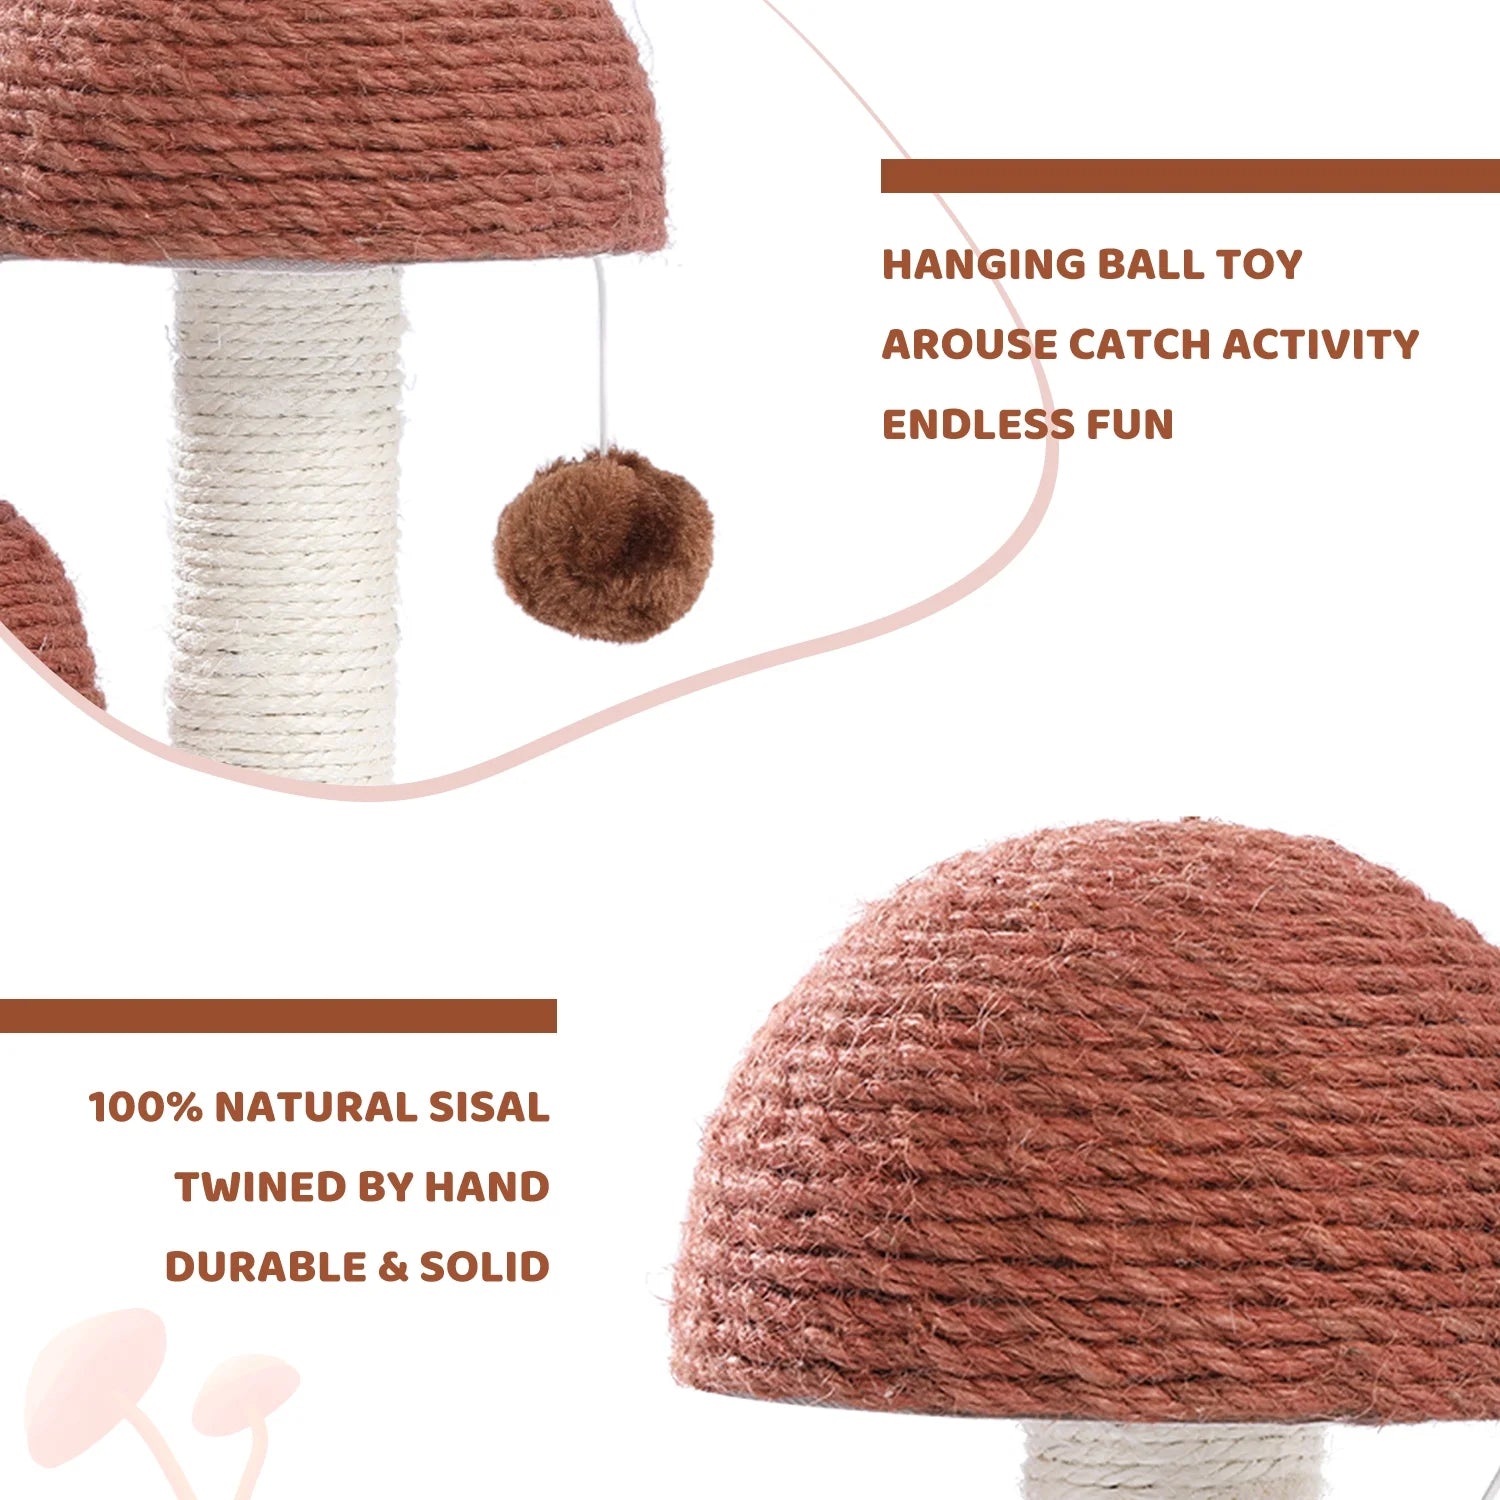 2 Mushrooms Cat Scratching Post 19" Sisal Claw Scratcher for Kittens a
 A cute mushroom-shaped scratcher, a cat scratching post toy and a home decor. 2 Sisal covered scratching posts in different heights would satisfy cats' different spets2 Mushrooms Cat Scratching Post 19" Sisal Claw Scratcher